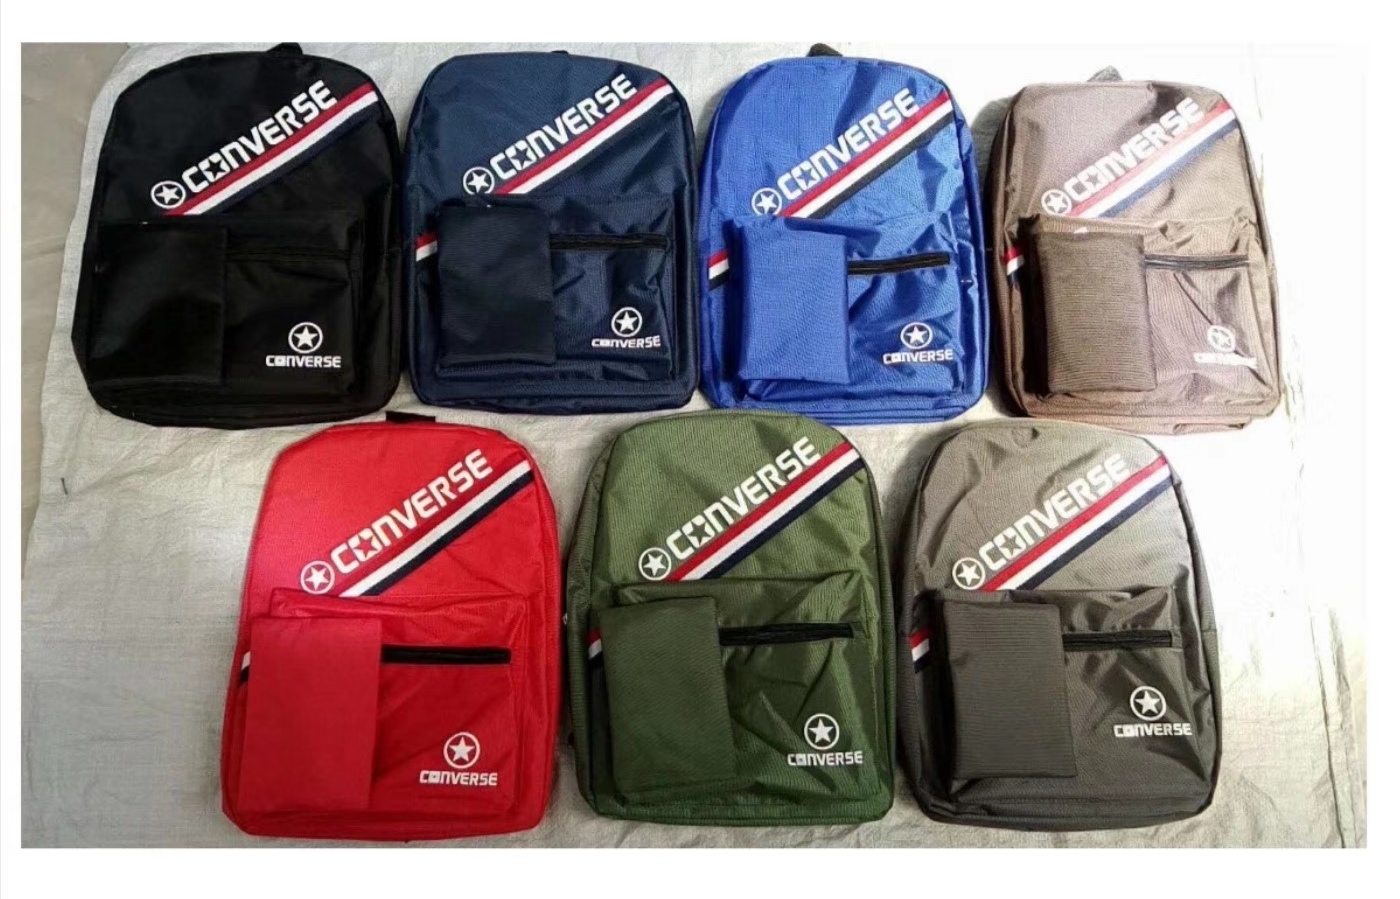 converse backpack bag it today